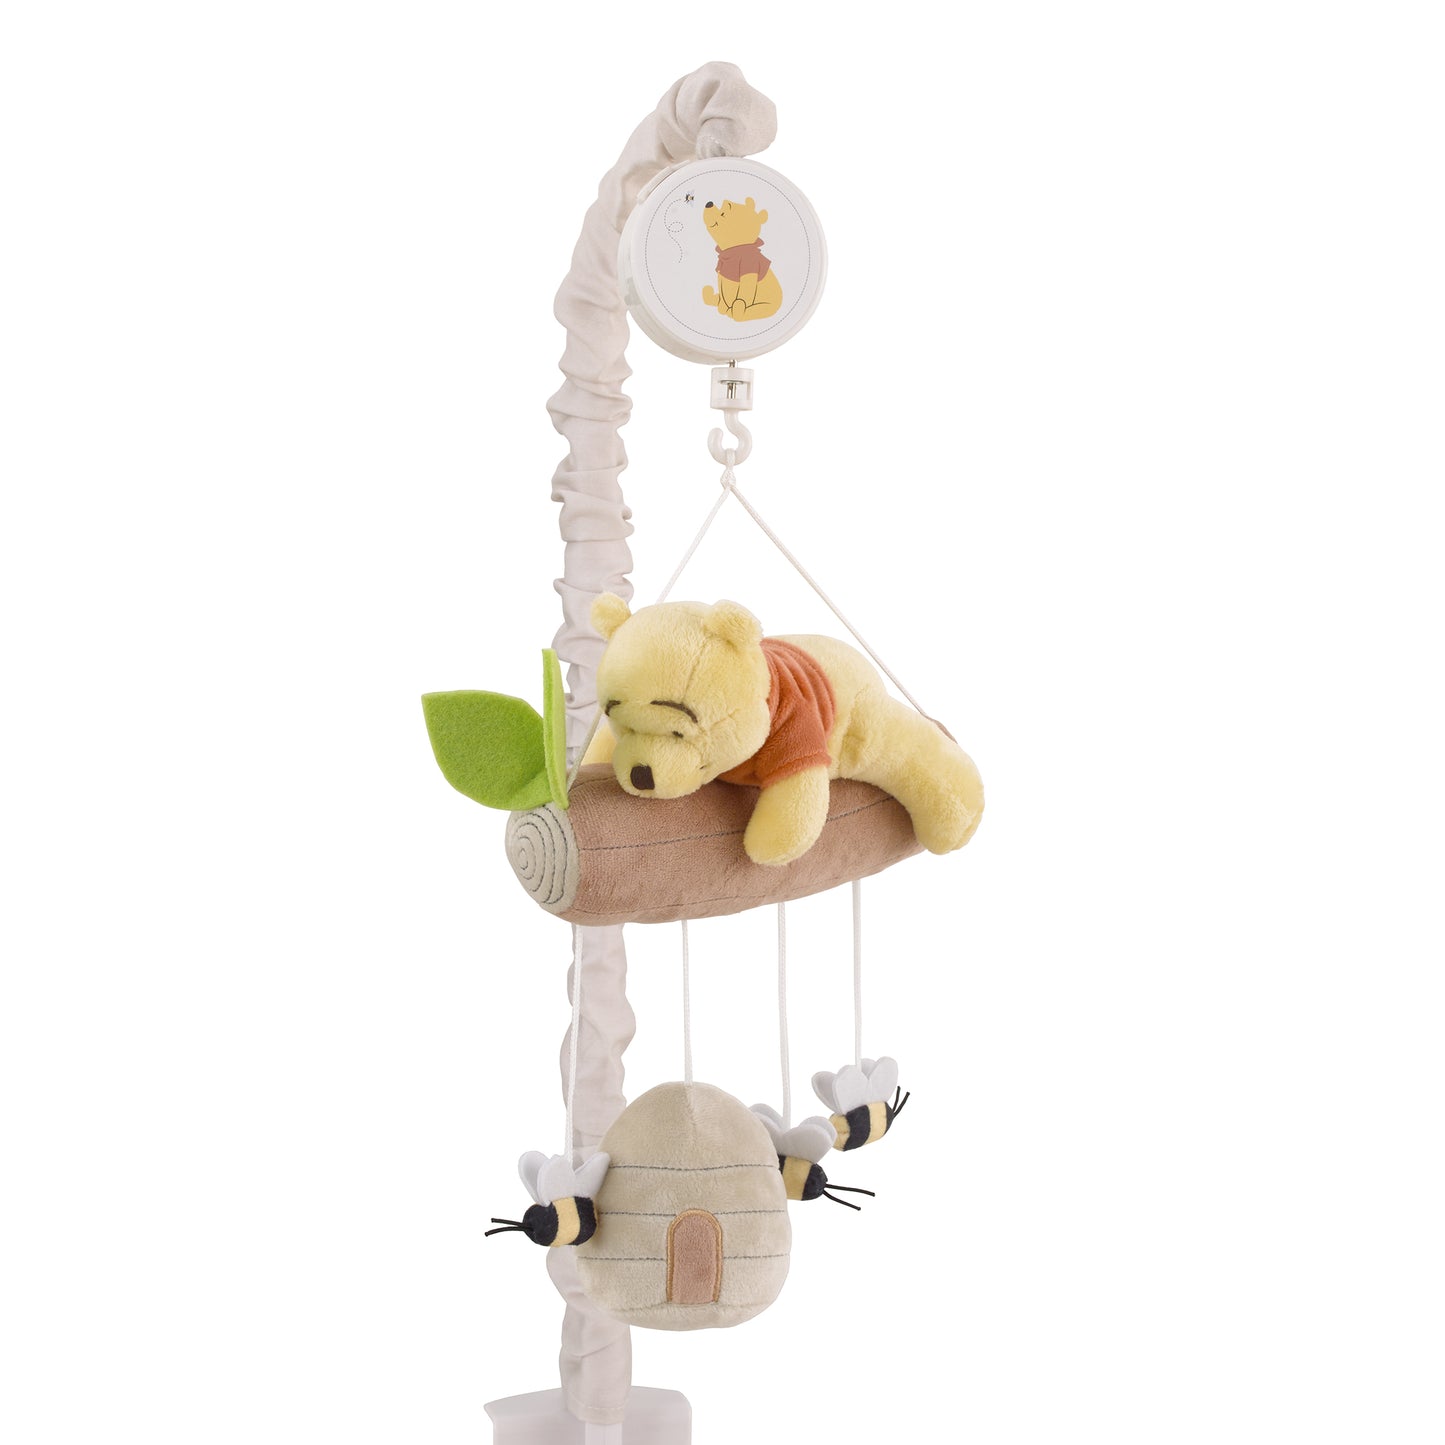 Disney Winnie the Pooh Hugs and Honeycombs Plush Musical Mobile with Bee Hive, Bees, Pooh Bear and Tree Branch